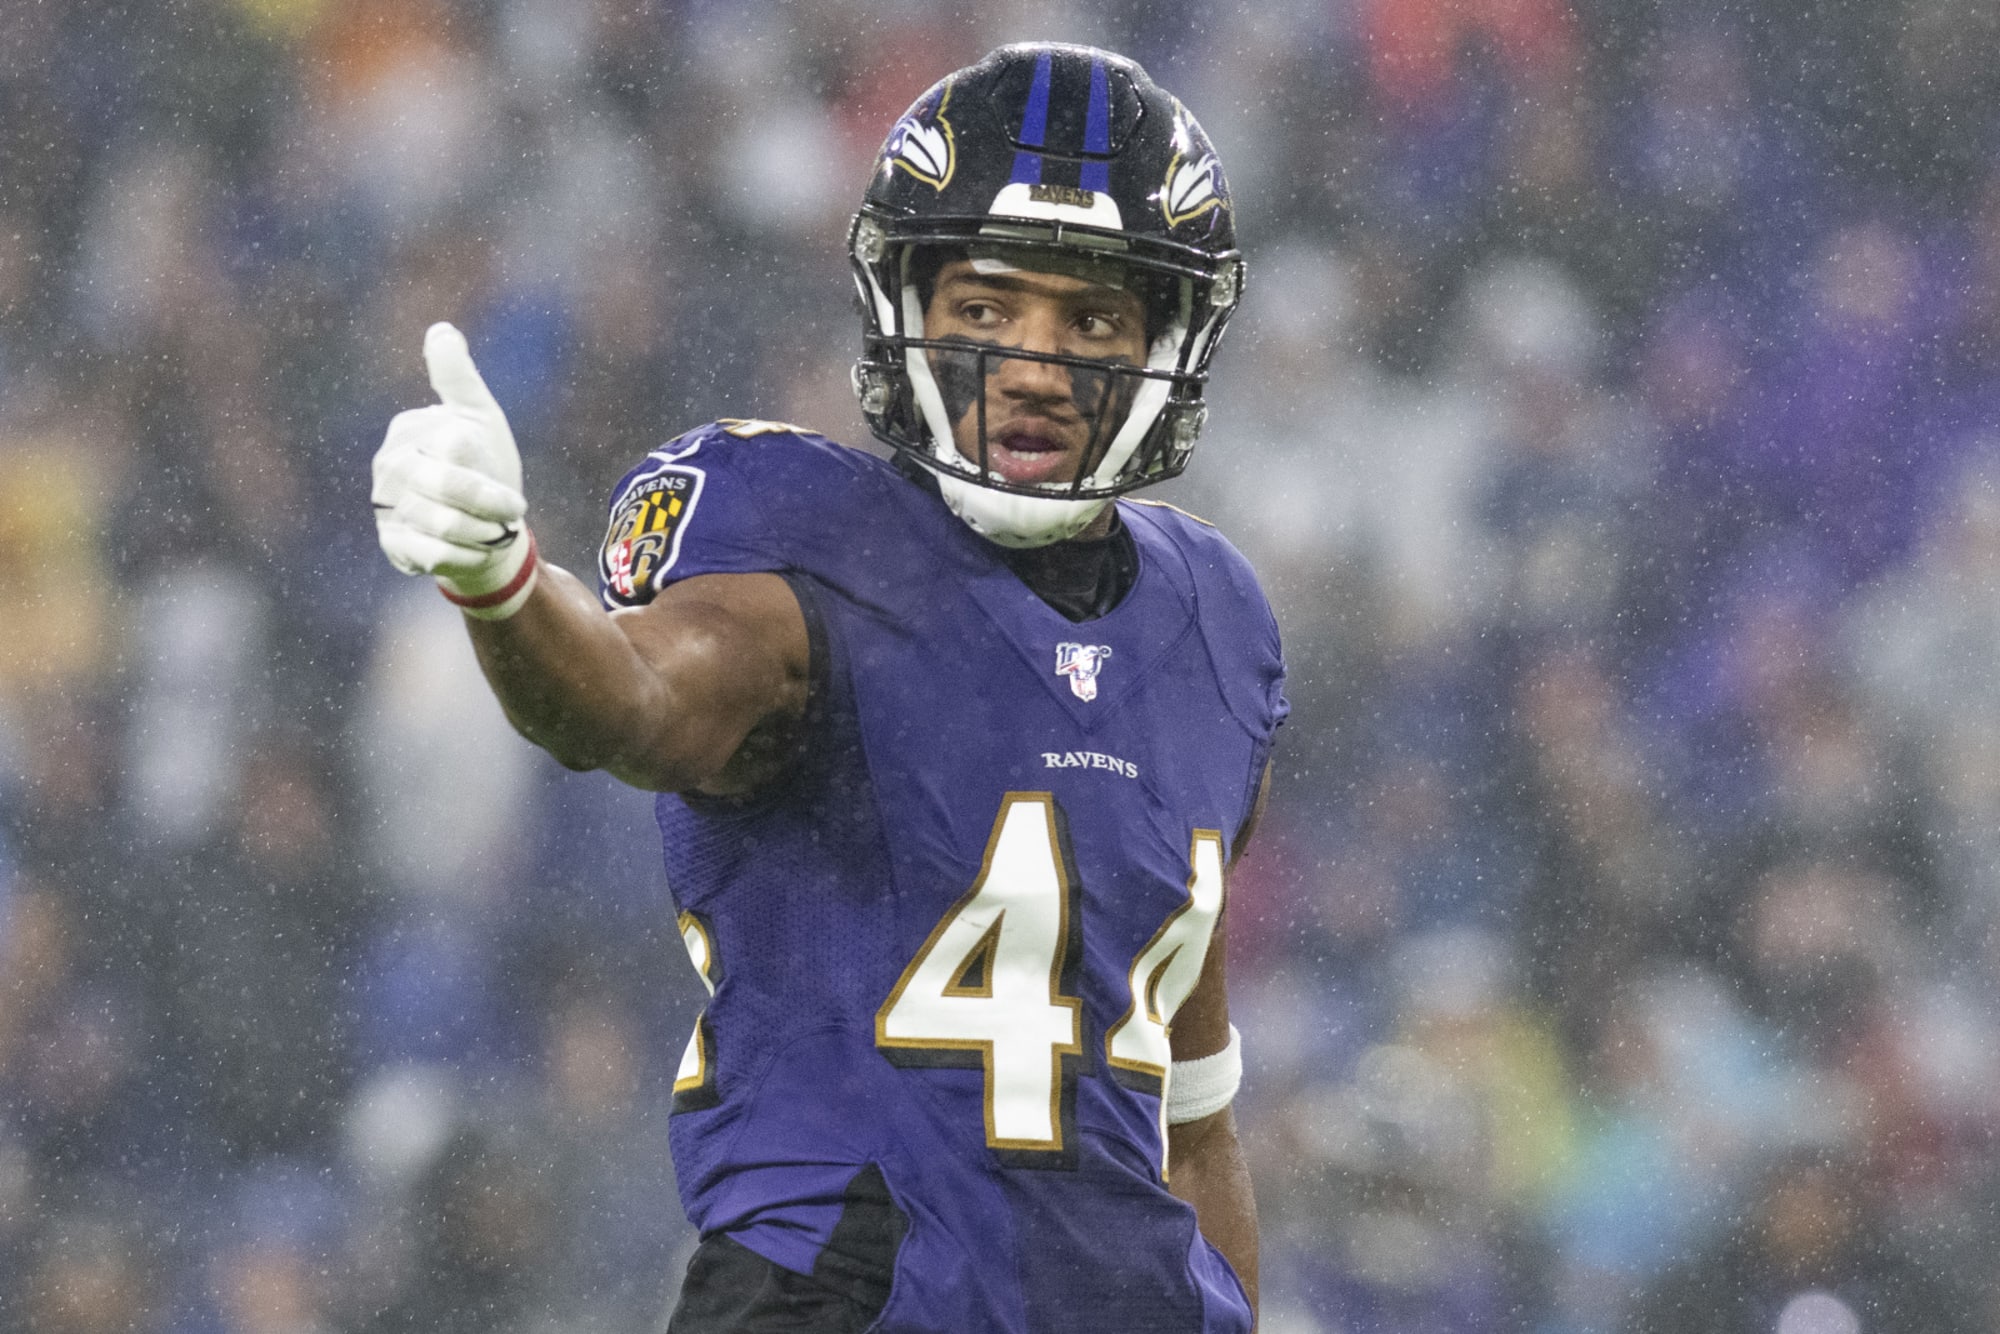 Marlon Humphrey thanking his father for paving the way will make you cry ( Video)